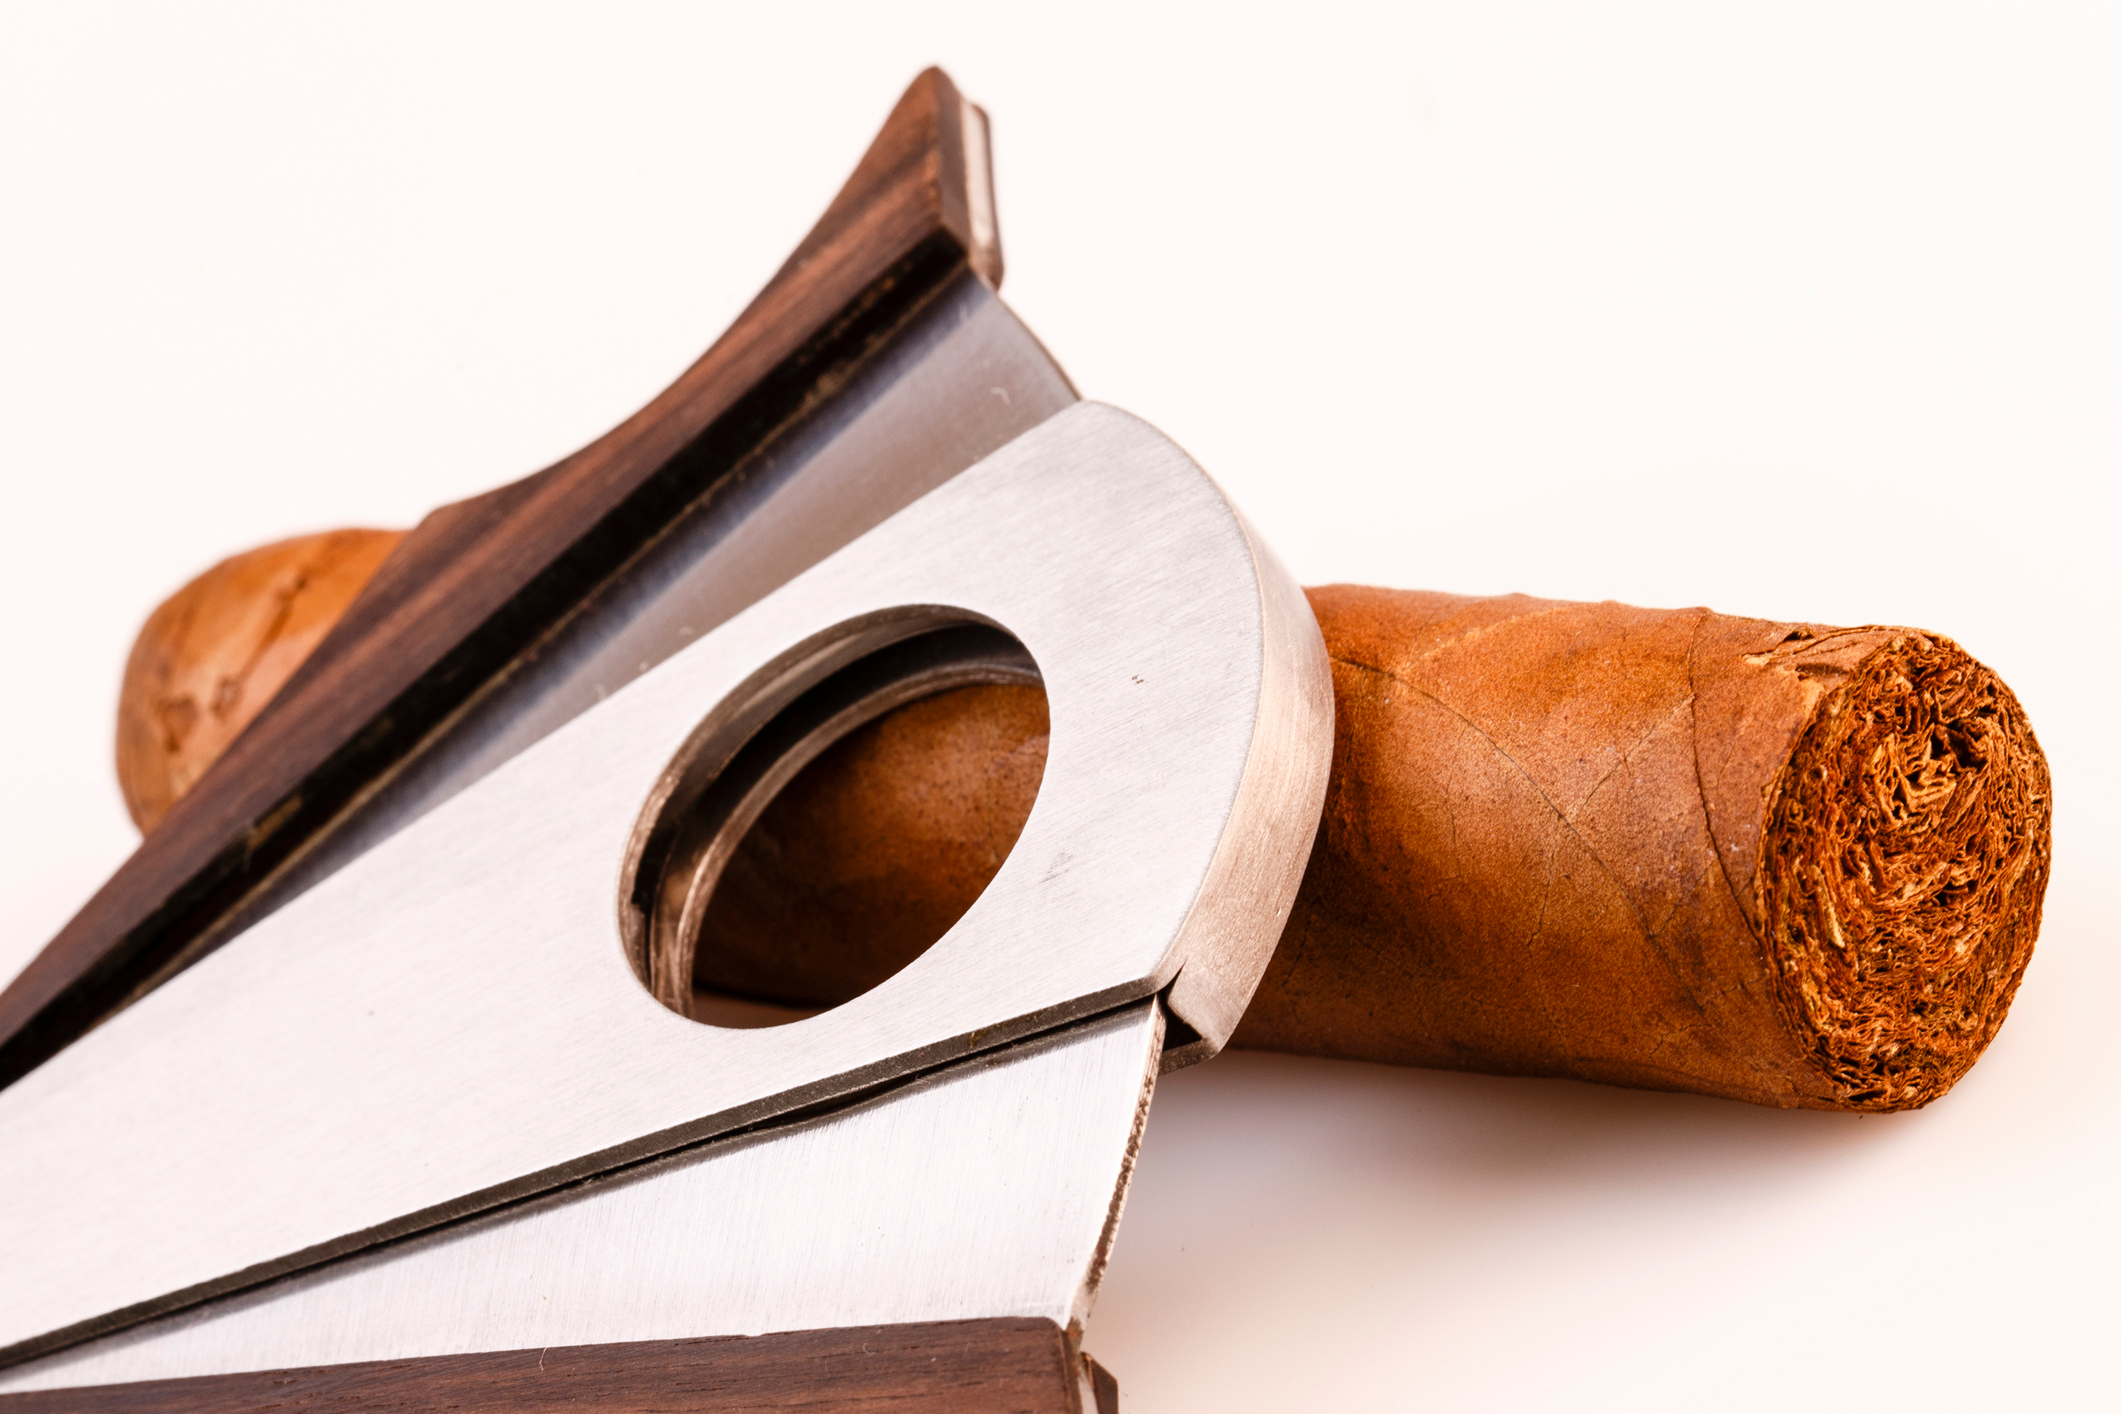 A selection of different cigar cutters with different shapes and bits